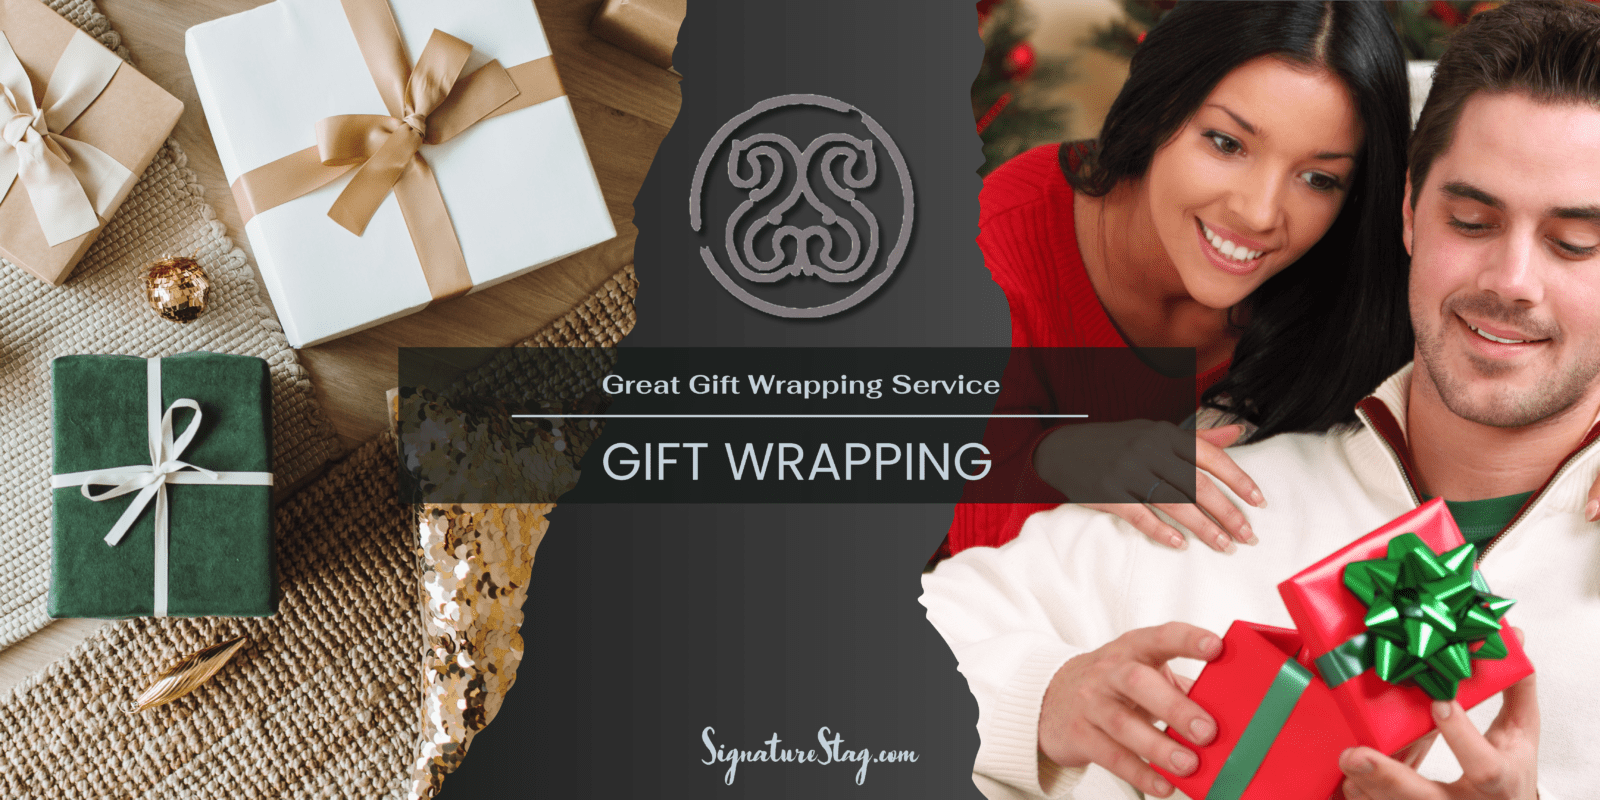 Find Gifts for Men in Lubbock and Midland Texas. Get our Great Gift Wrapping Service for your dad, father, or brother.